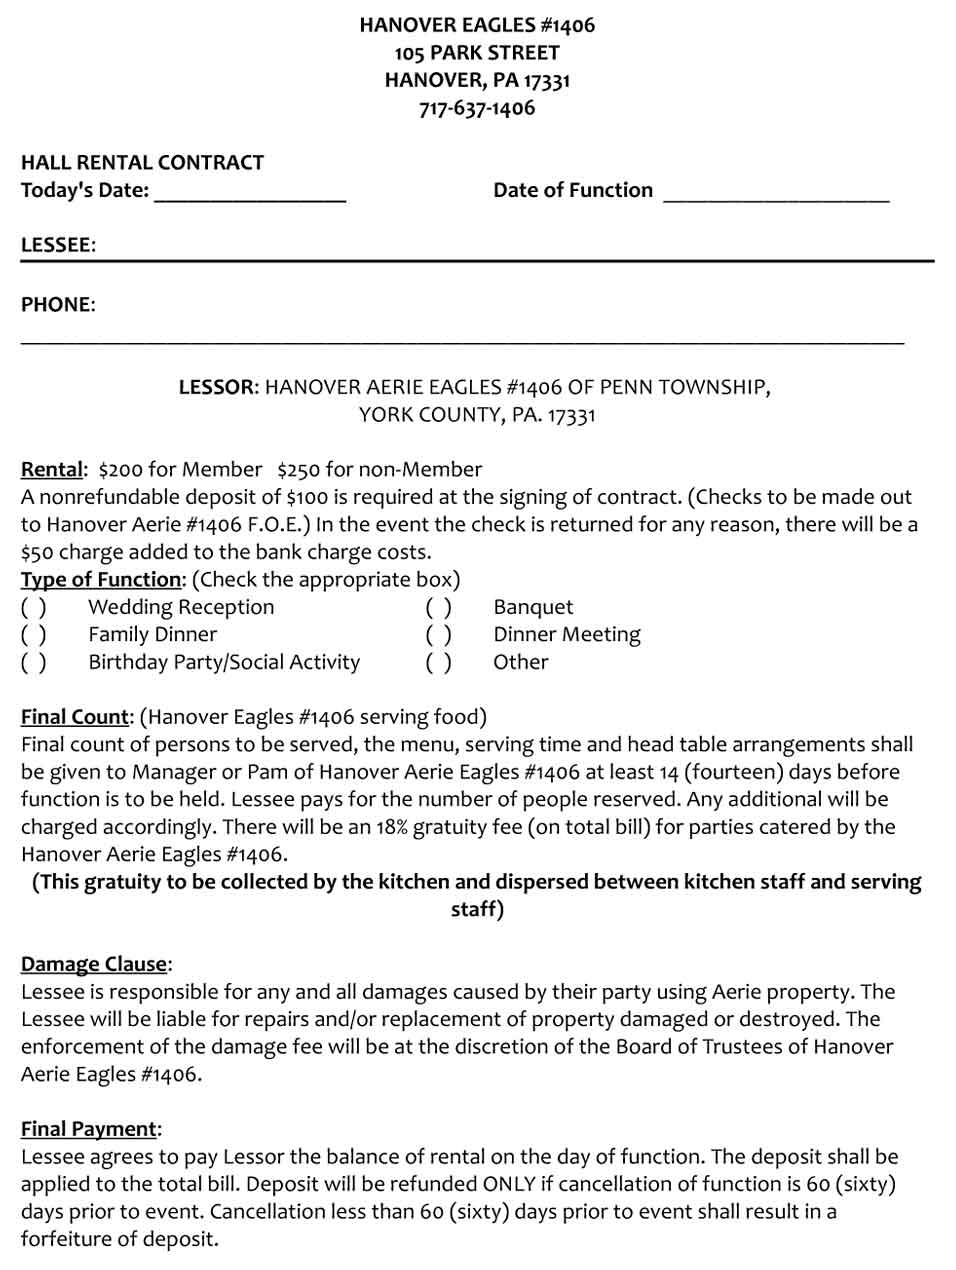 Hanover Eagles Hall Rental Contract-Page 1